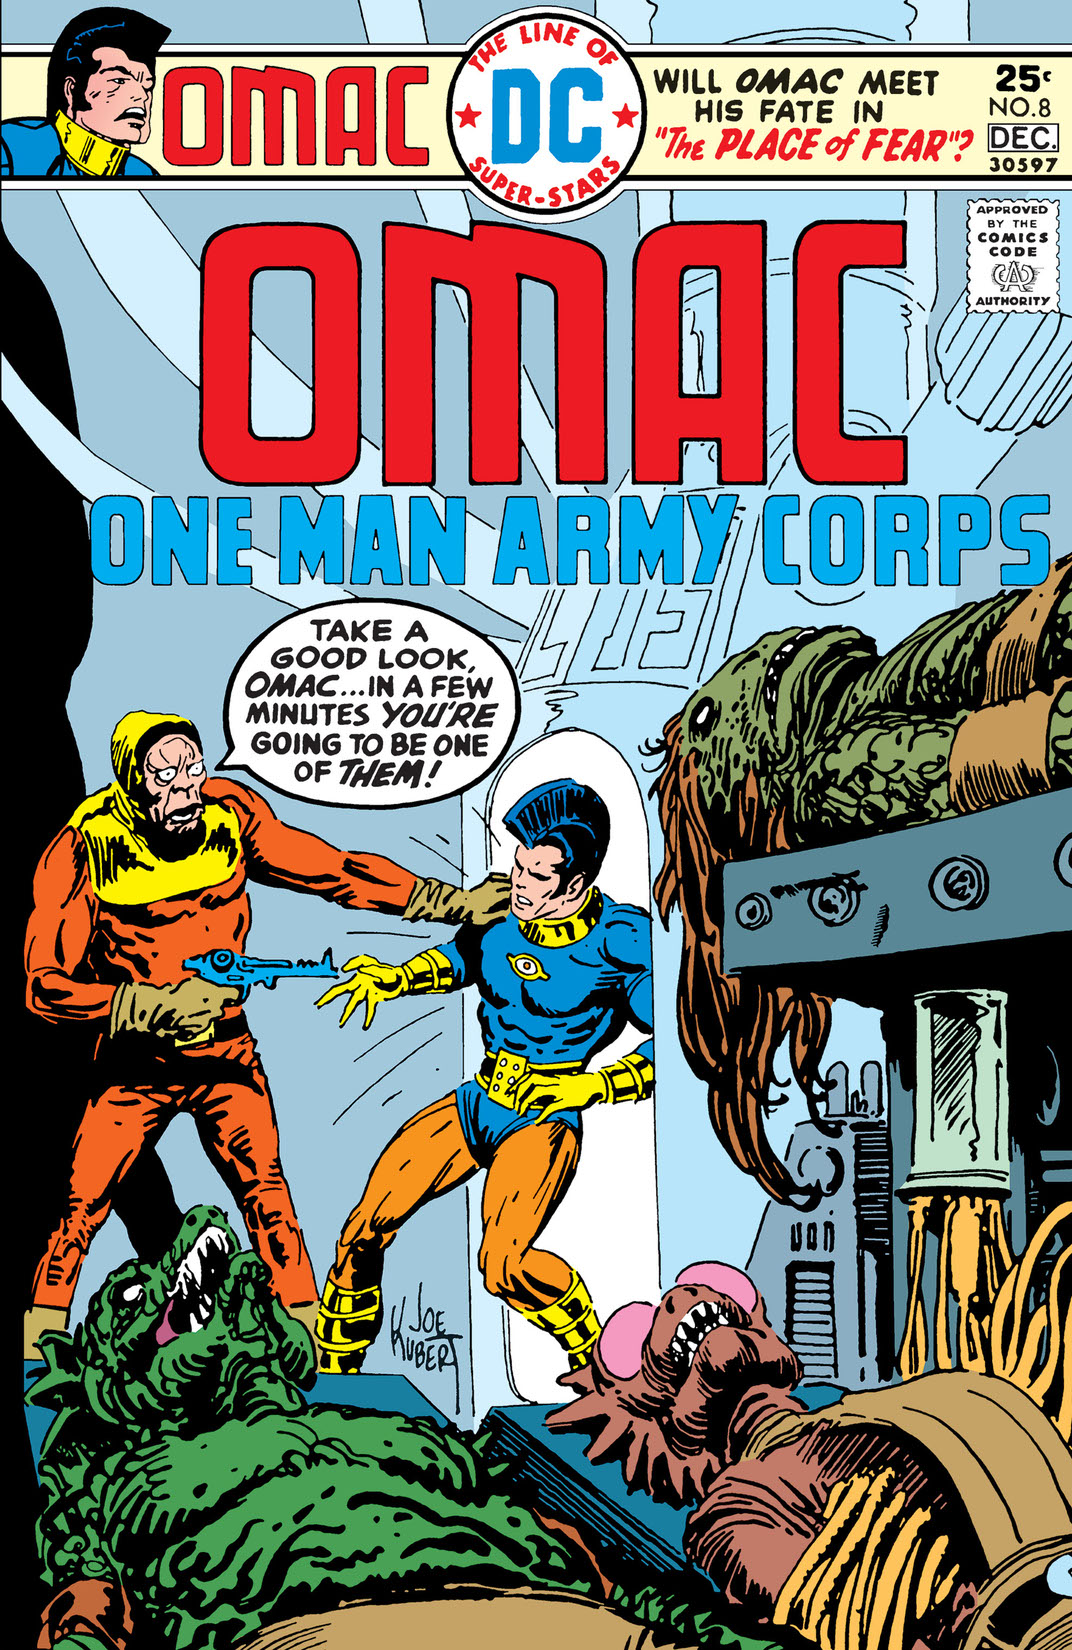 O.M.A.C. (1974-) #8 preview images